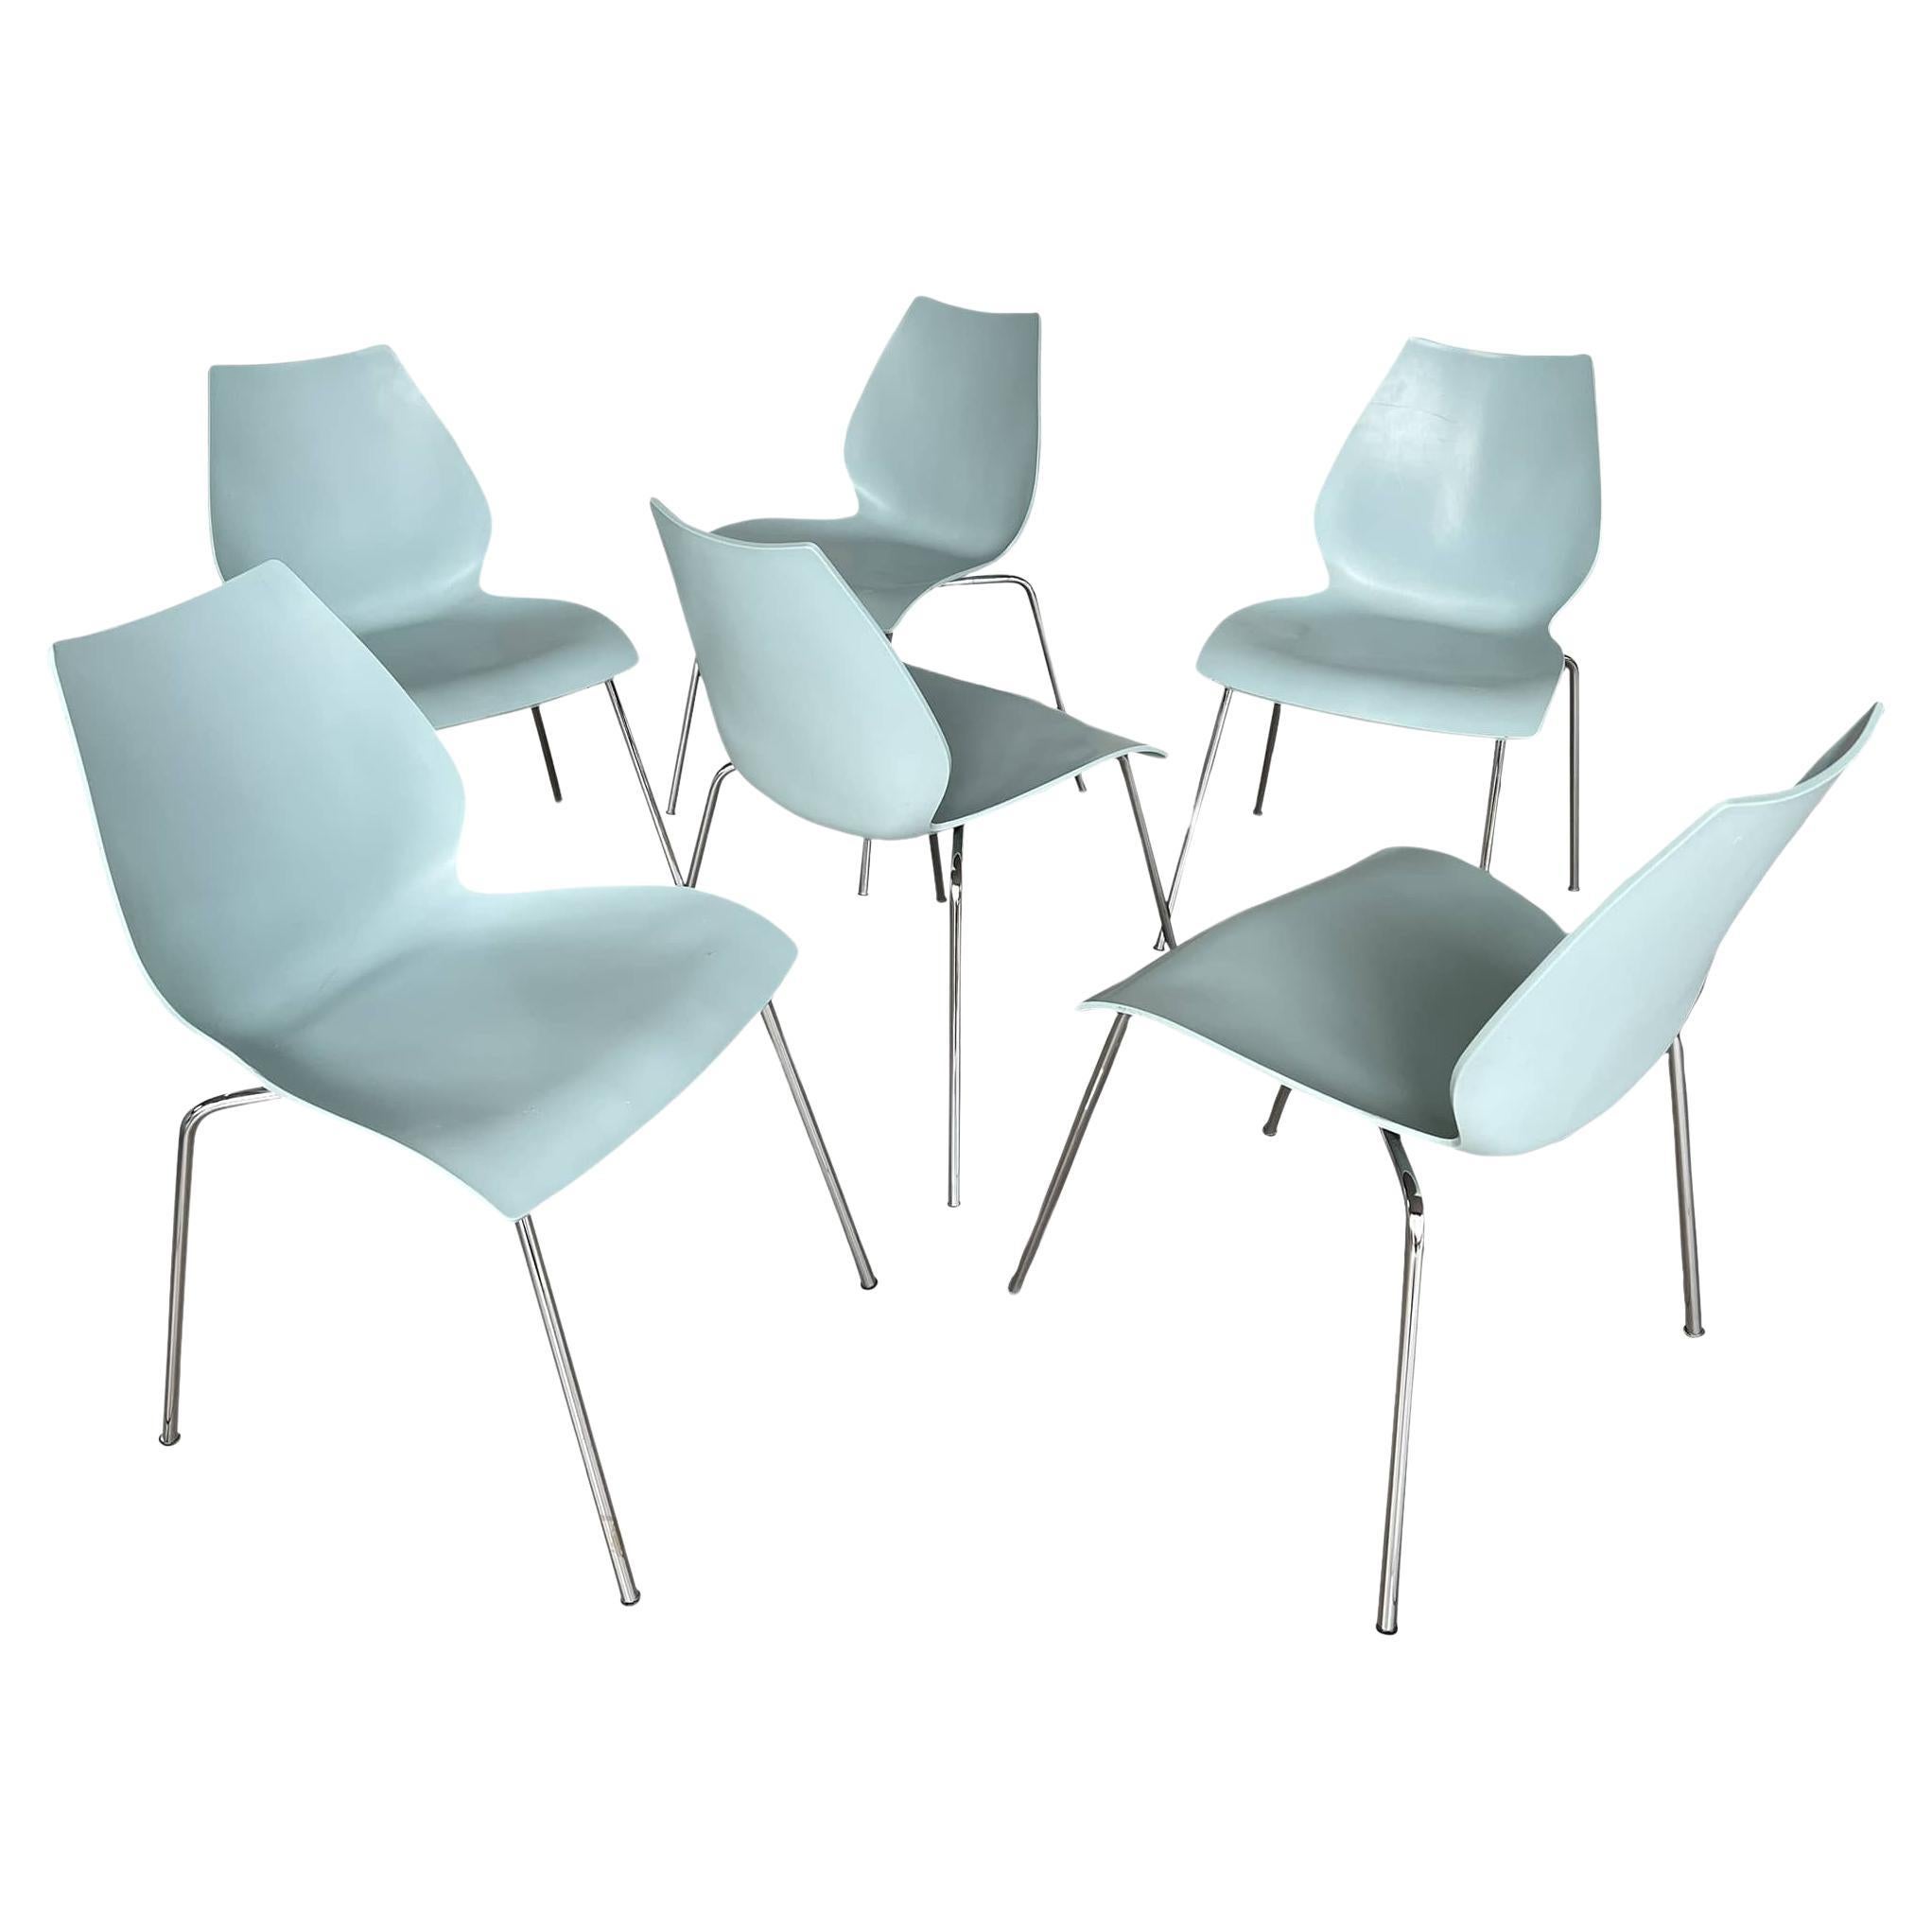 Italian Maui Pale Blue Side Dining Chair Vico Magistretti for Kartell - Set of 6 For Sale